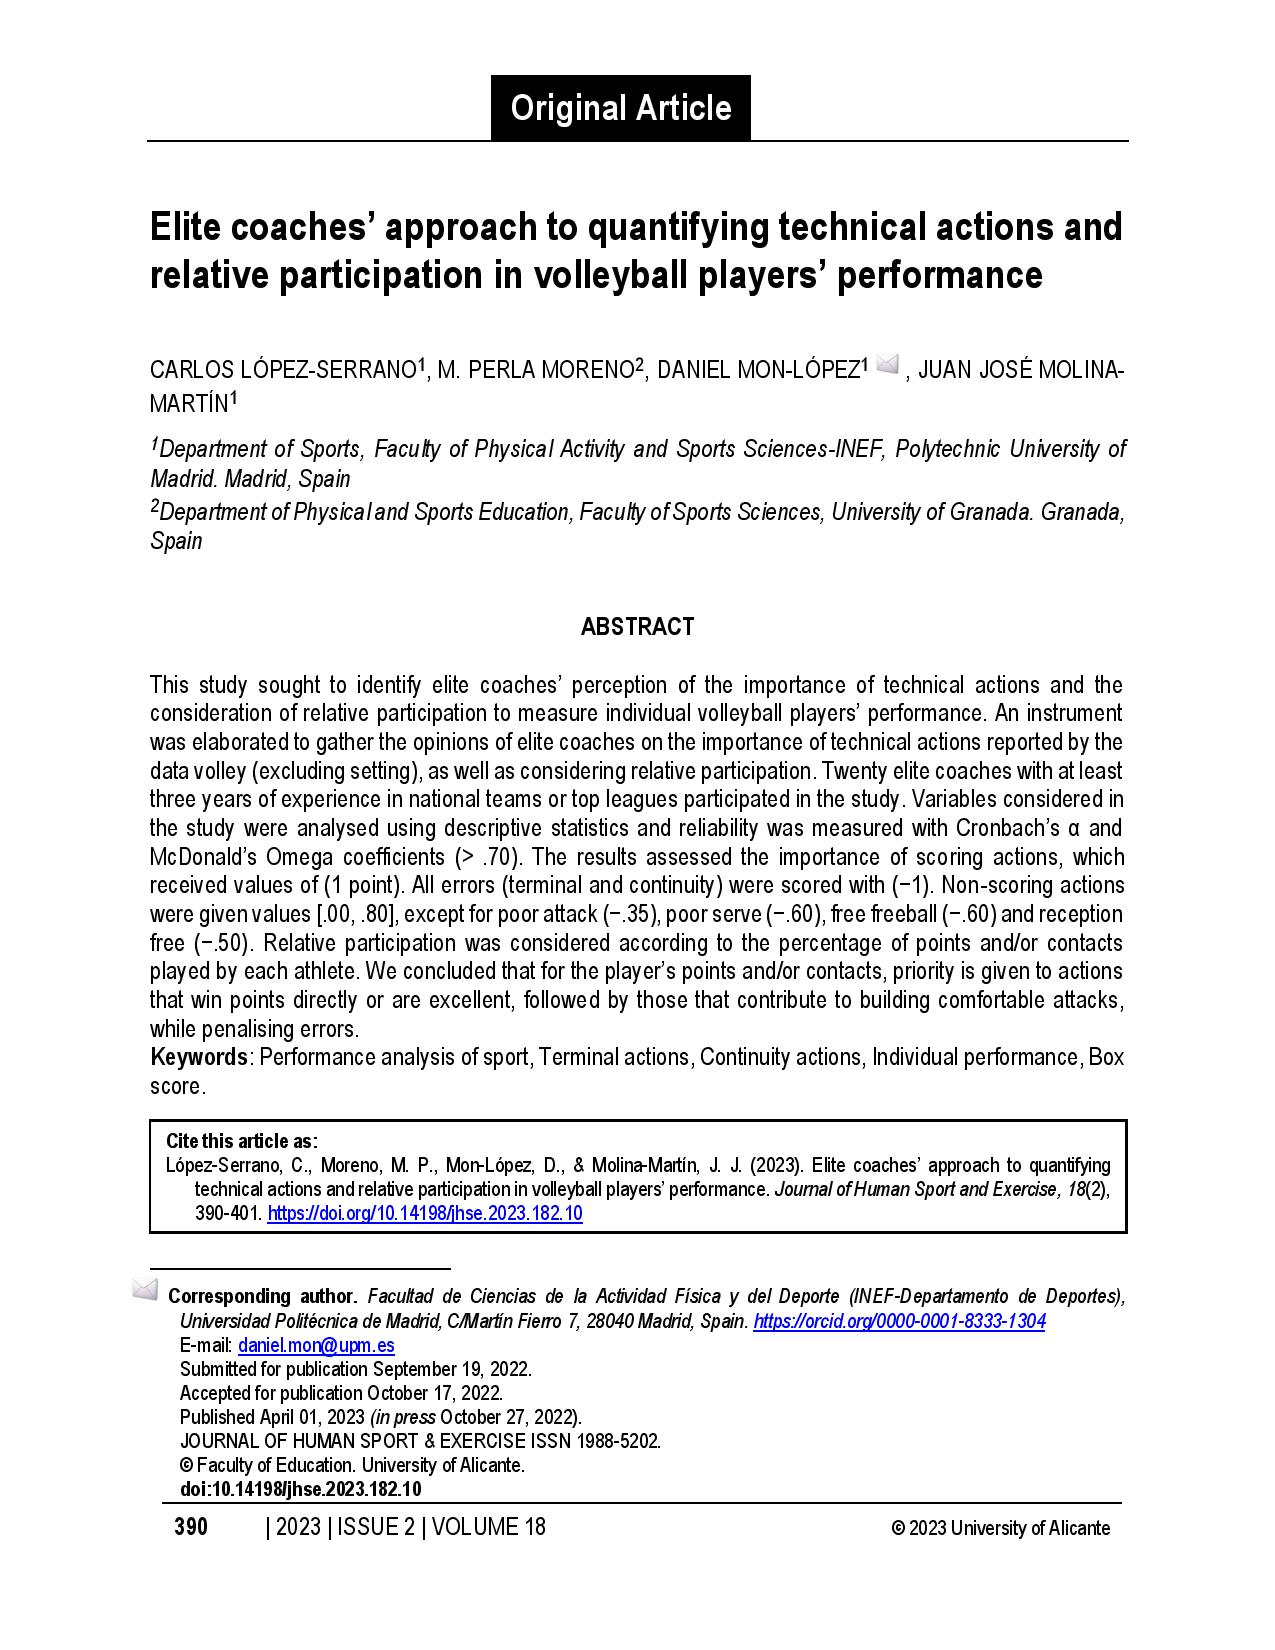 Elite coaches’ approach to quantifying technical actions and relative participation in volleyball players’ performance